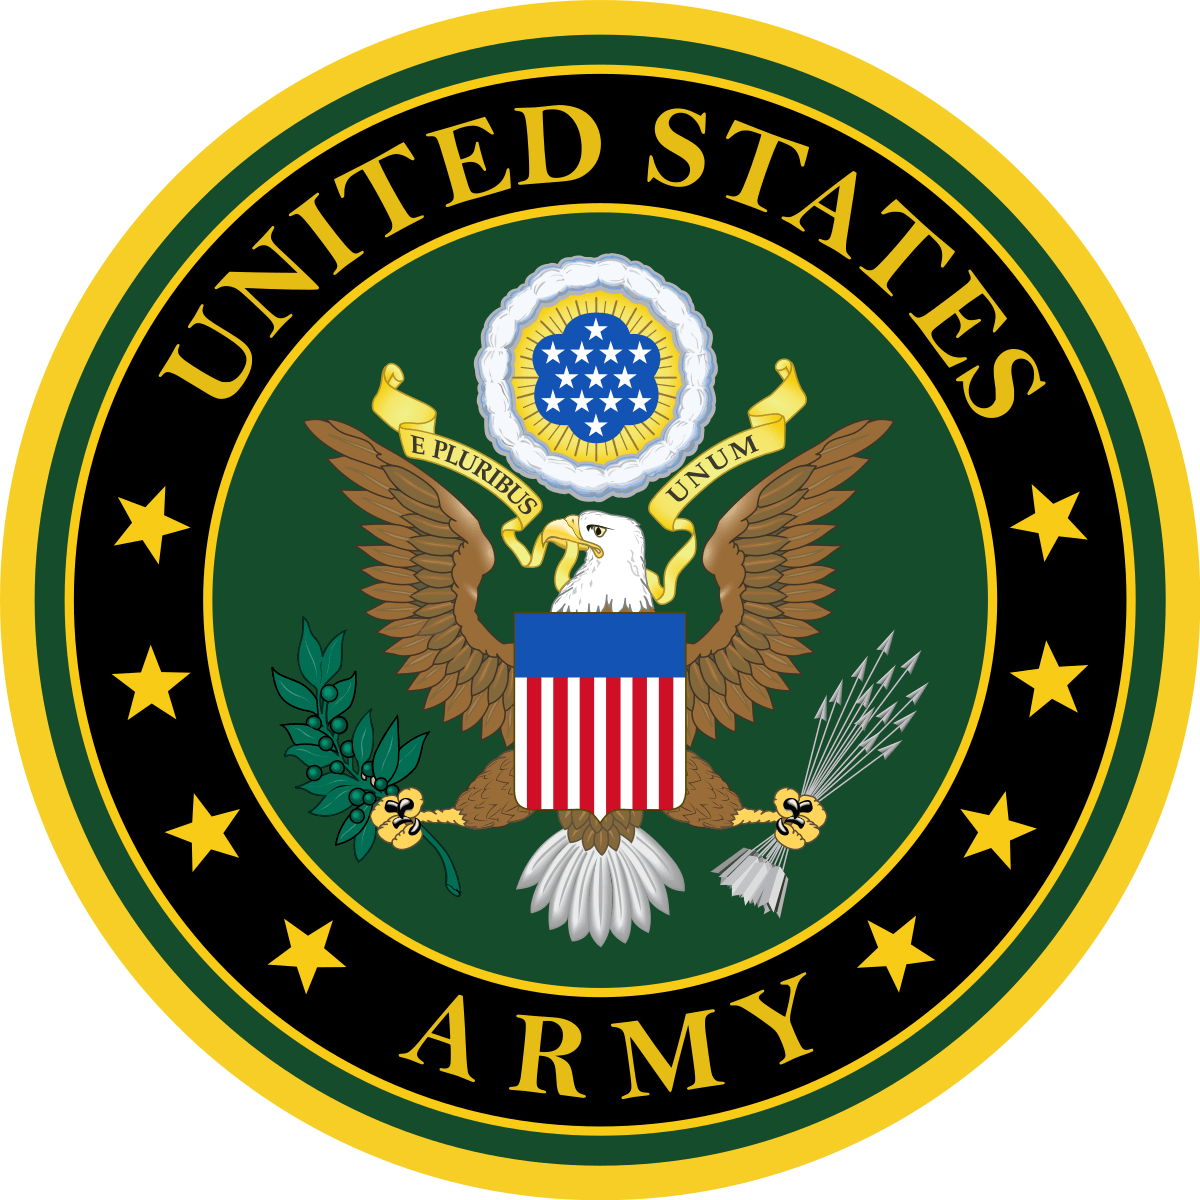 US Army Mission Statement